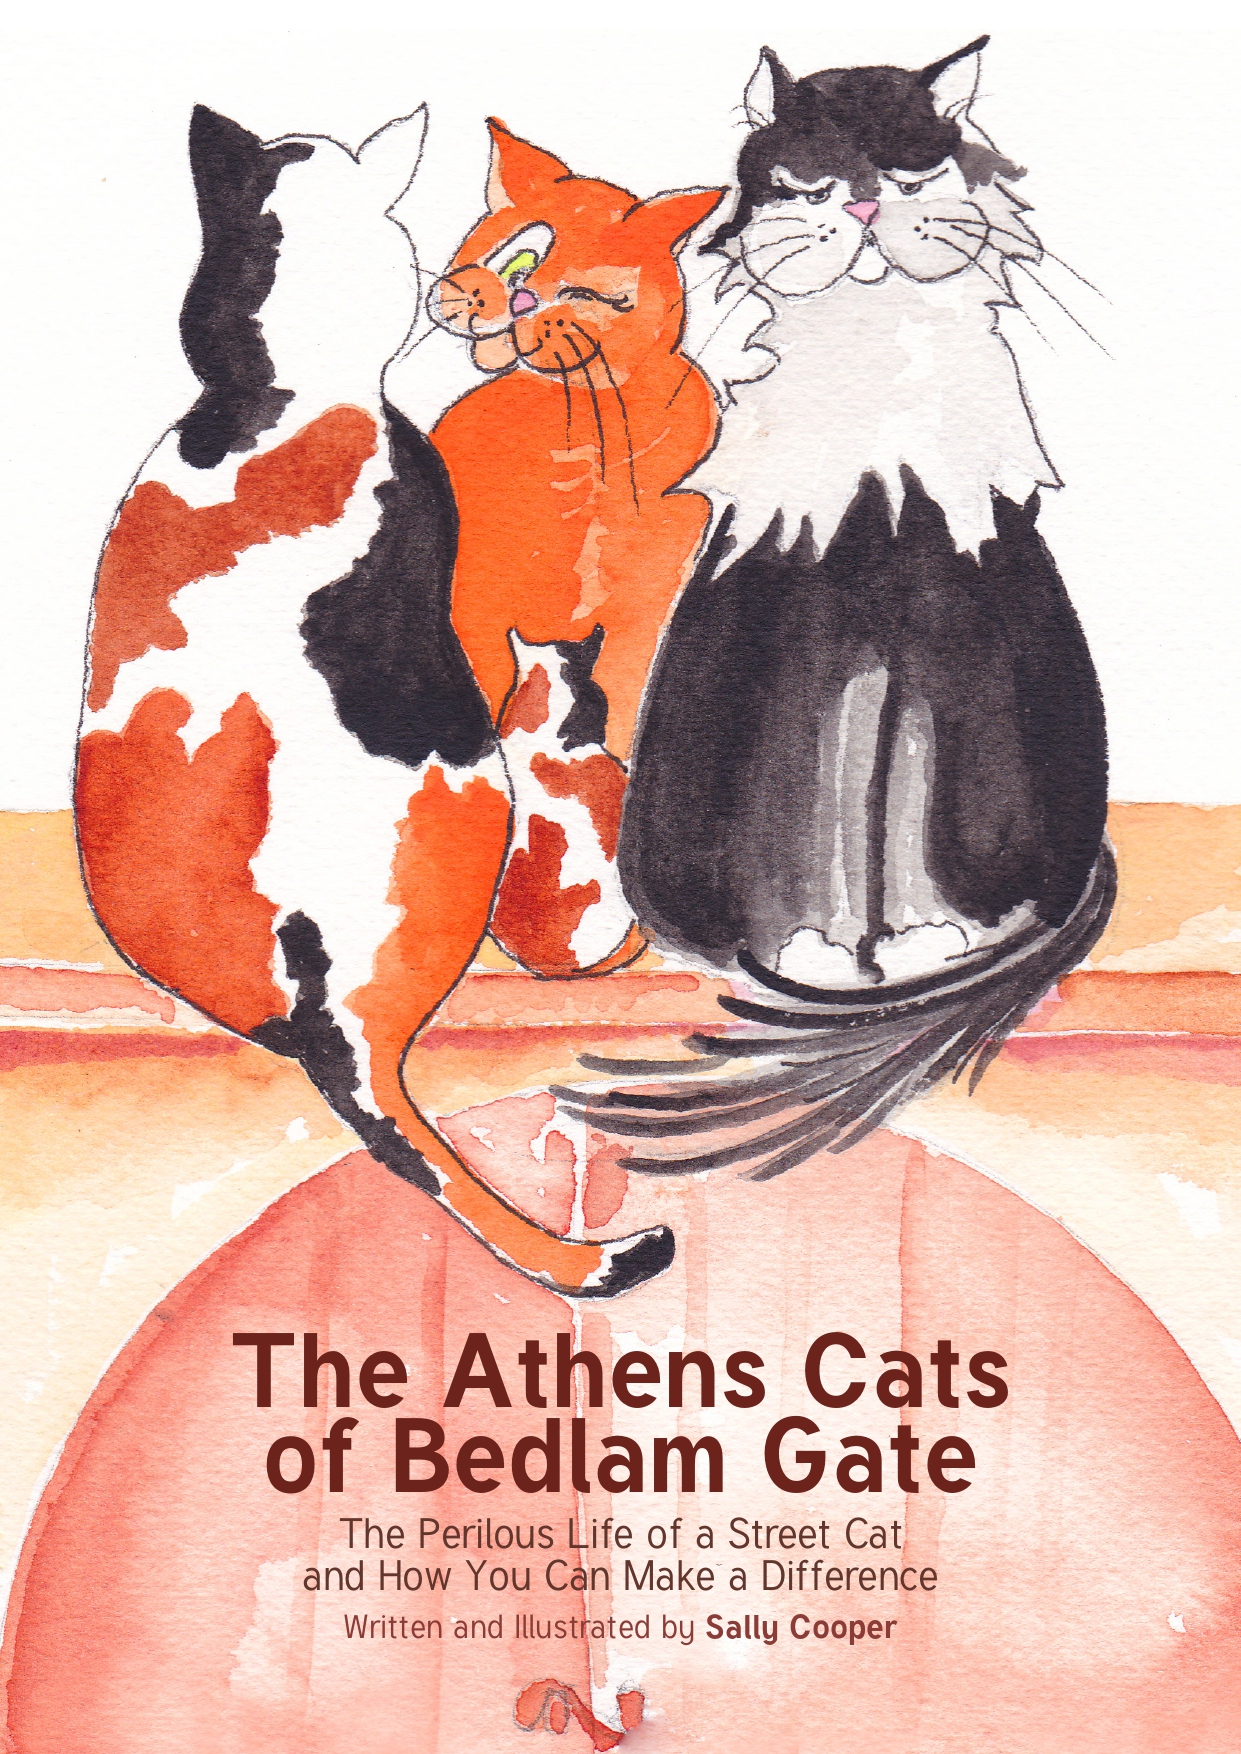 Cover of a book illustrating a cat gang.